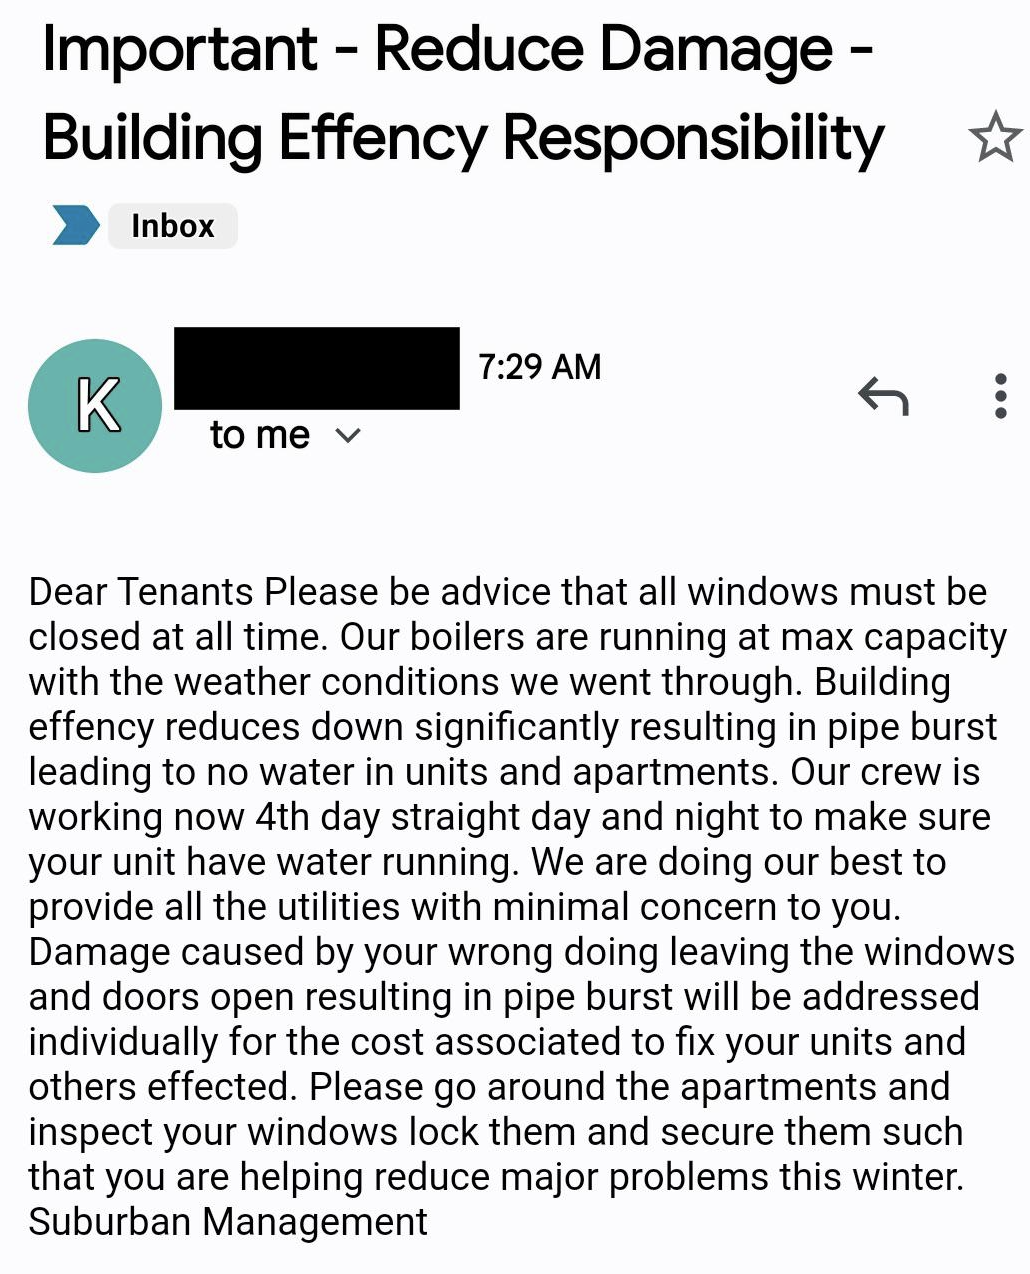 An email from a landlord